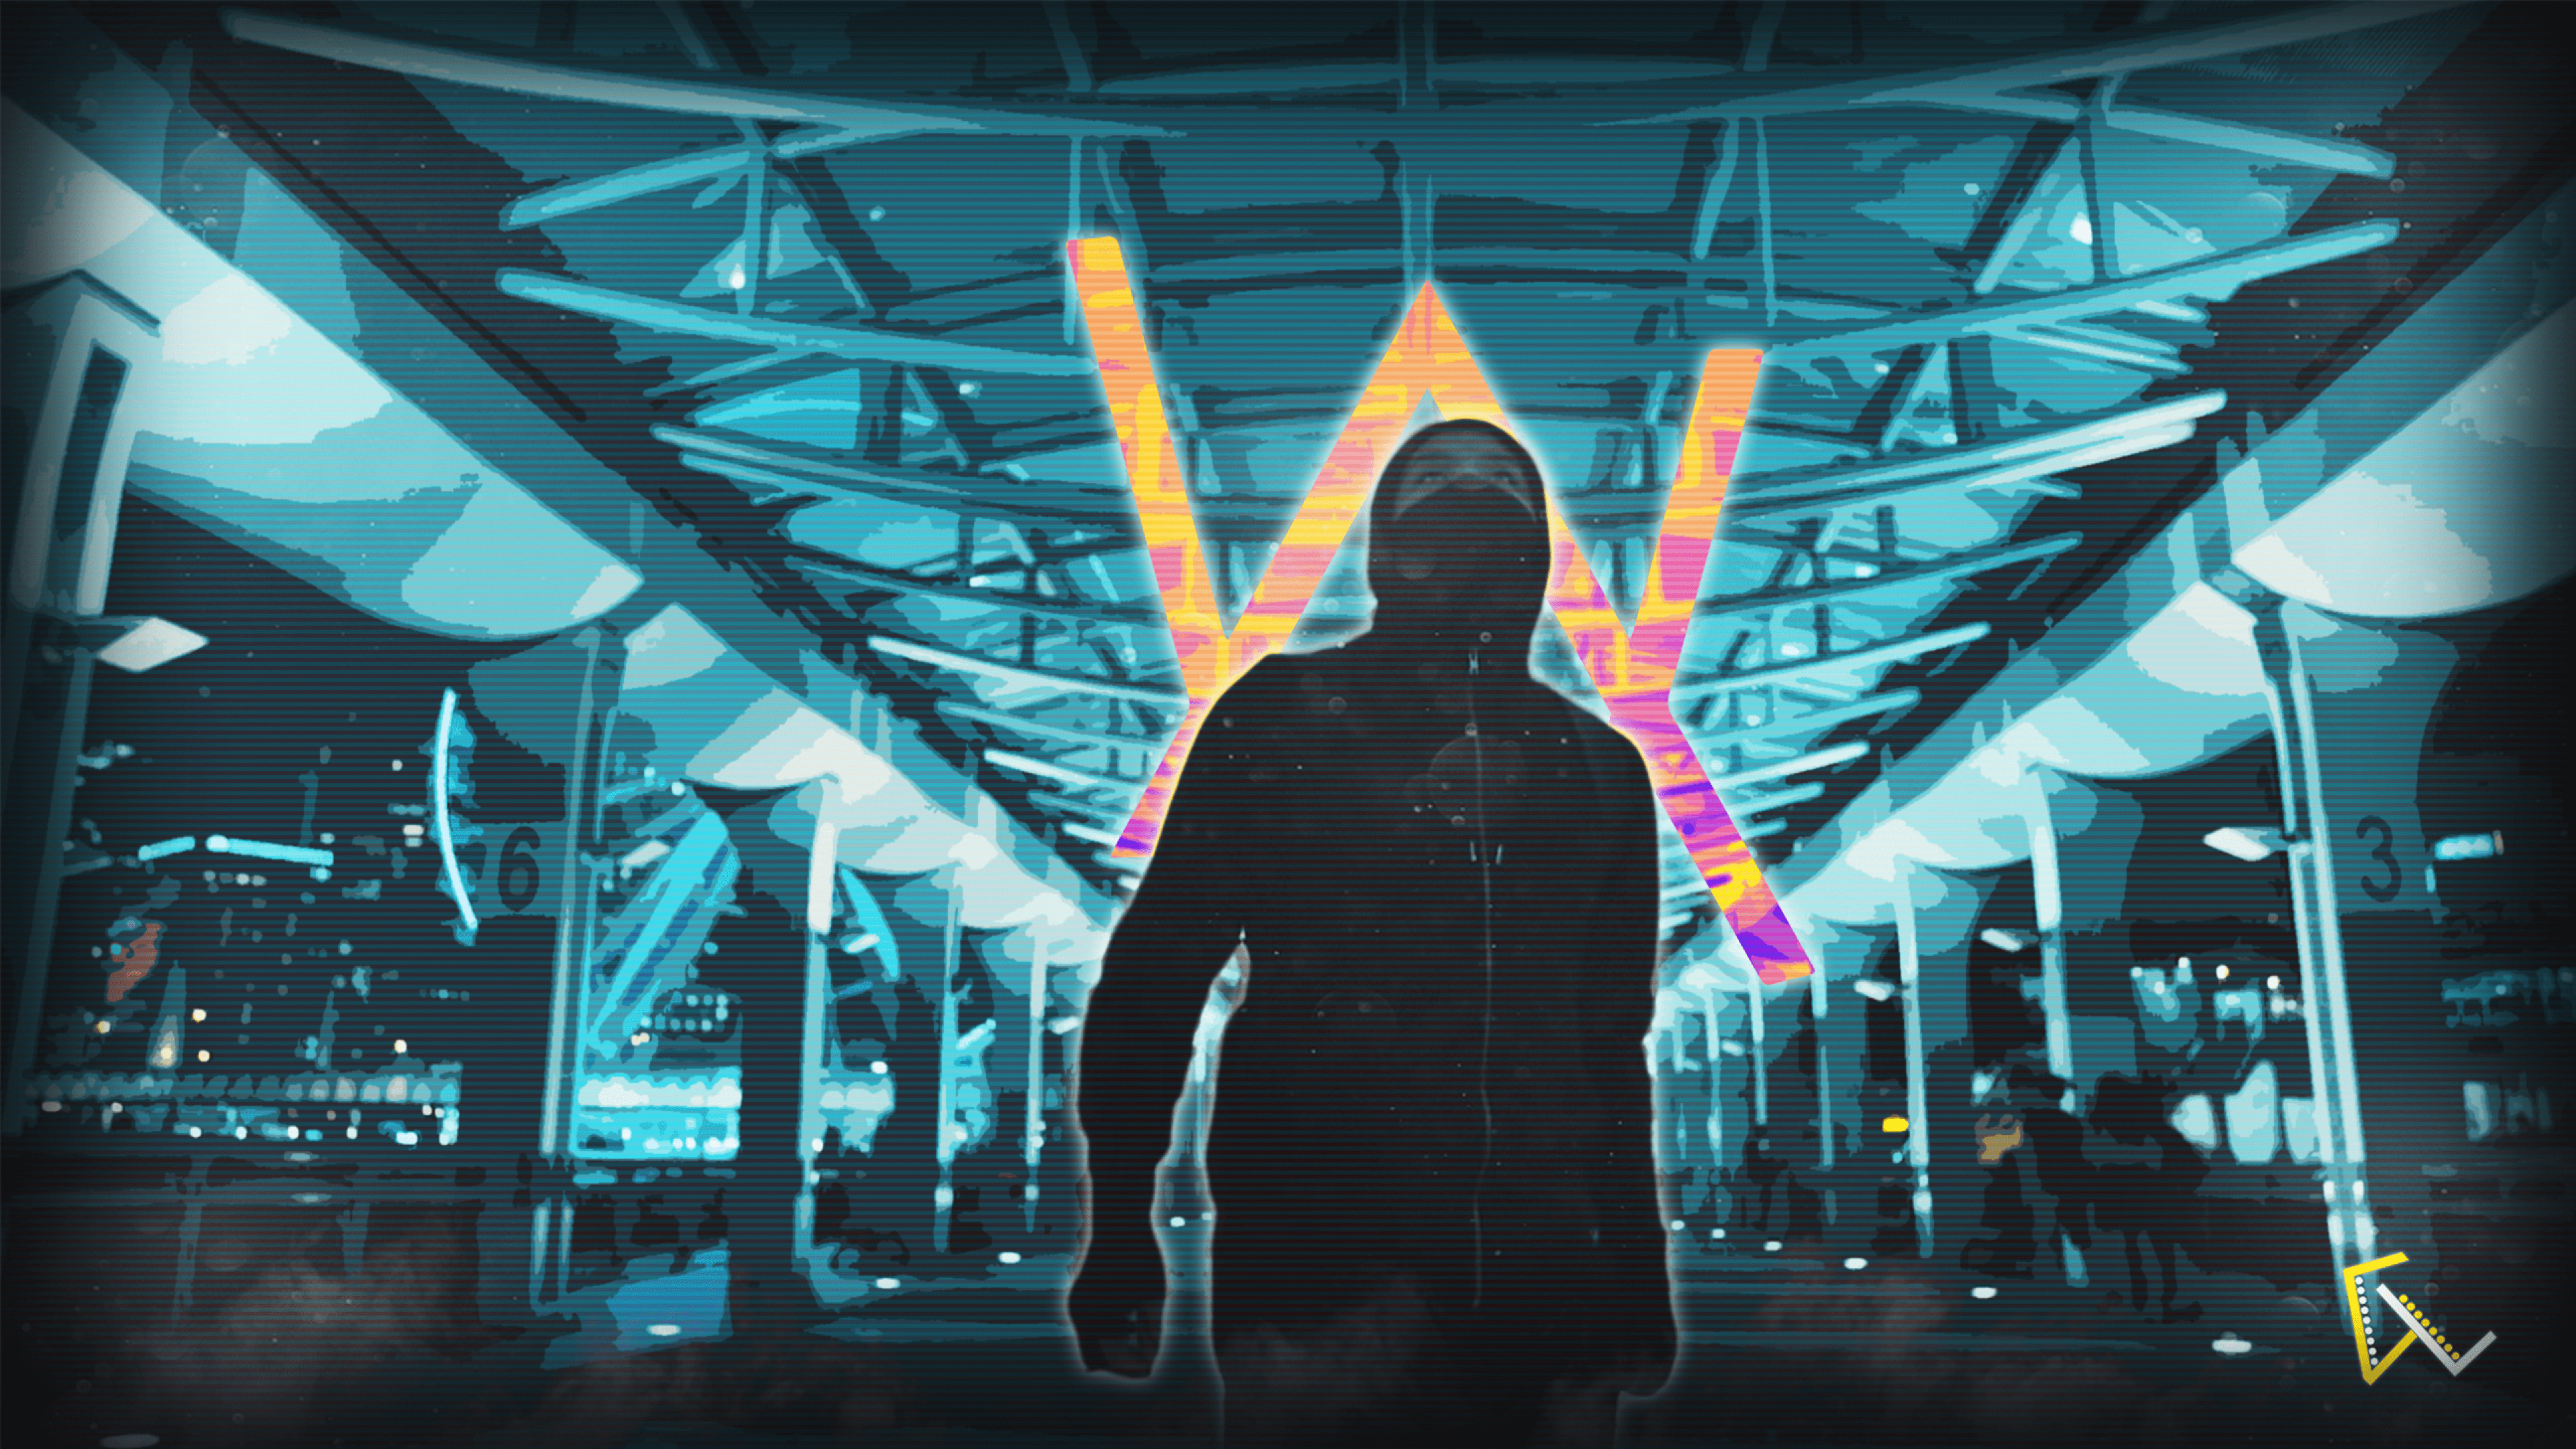  Alan  Walker  Abstract 4k  HD  Music 4k  Wallpapers  Images 